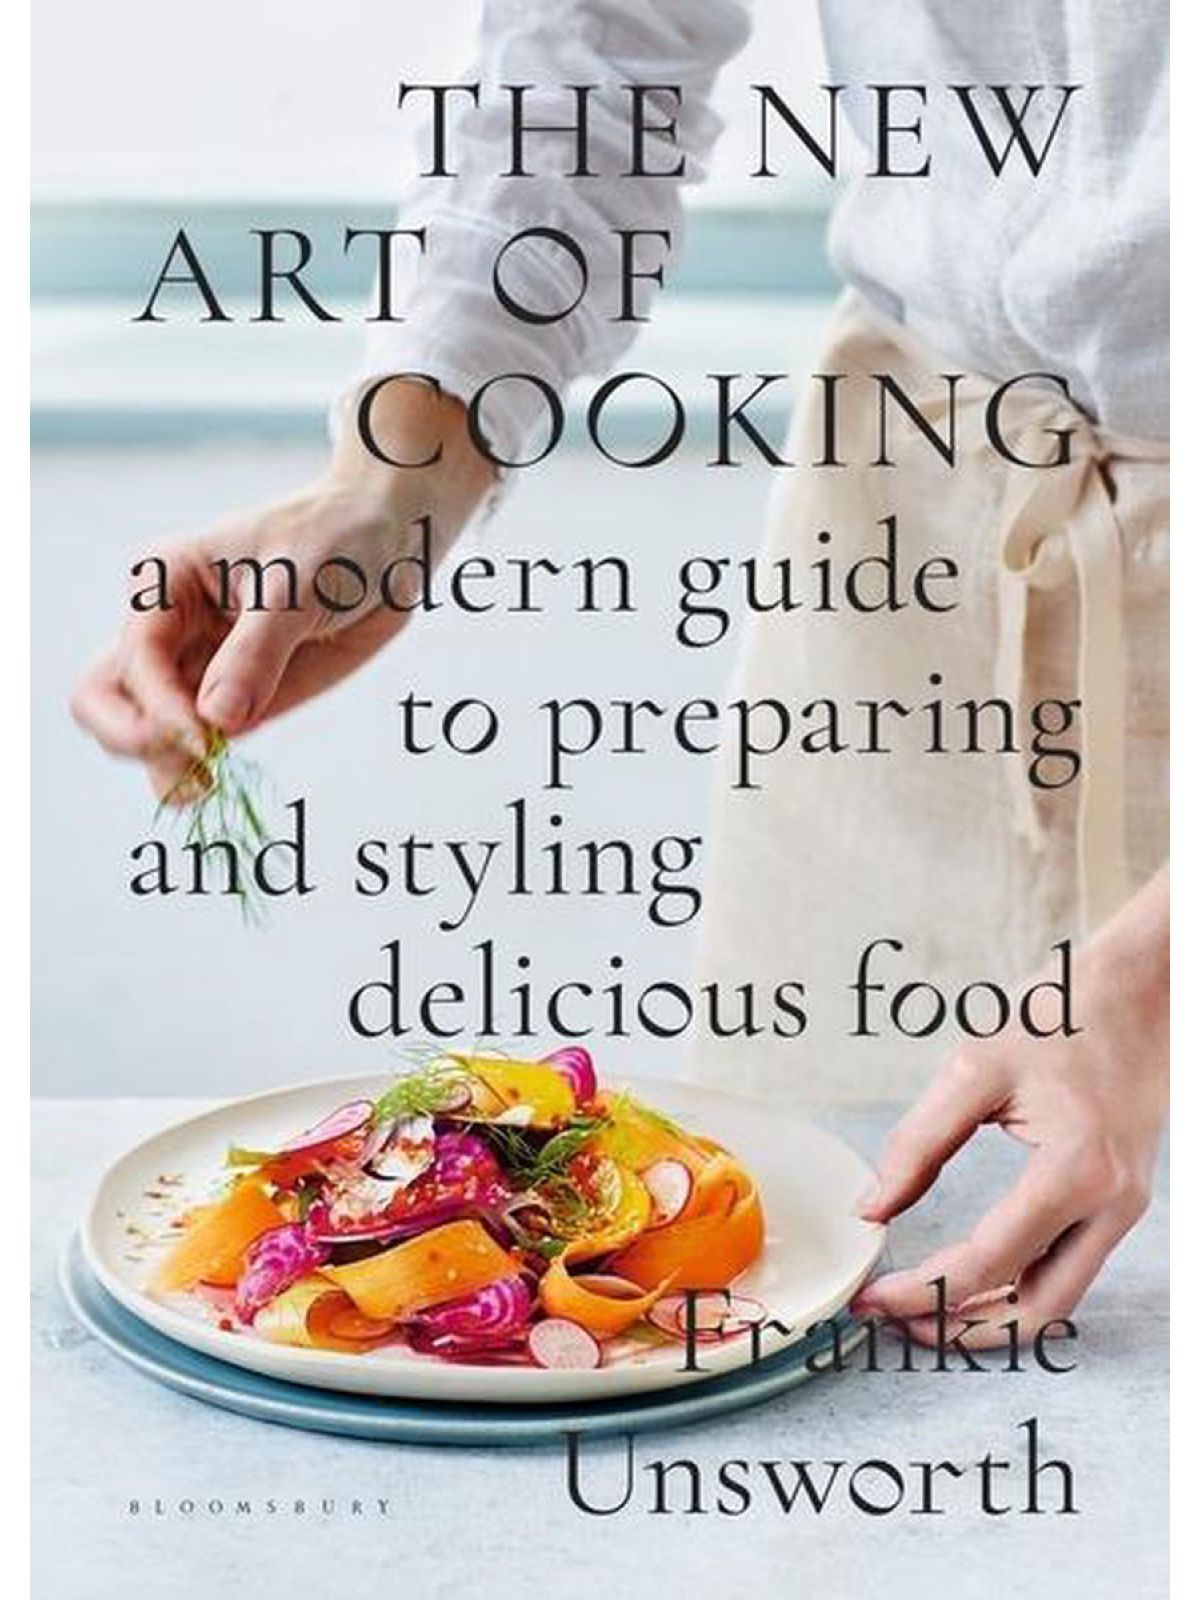 NEW ART OF COOKING- A MODERN GUIDE TO PREPARING & STYLING DELICIOUS FOOD  Купить Книгу на Английском